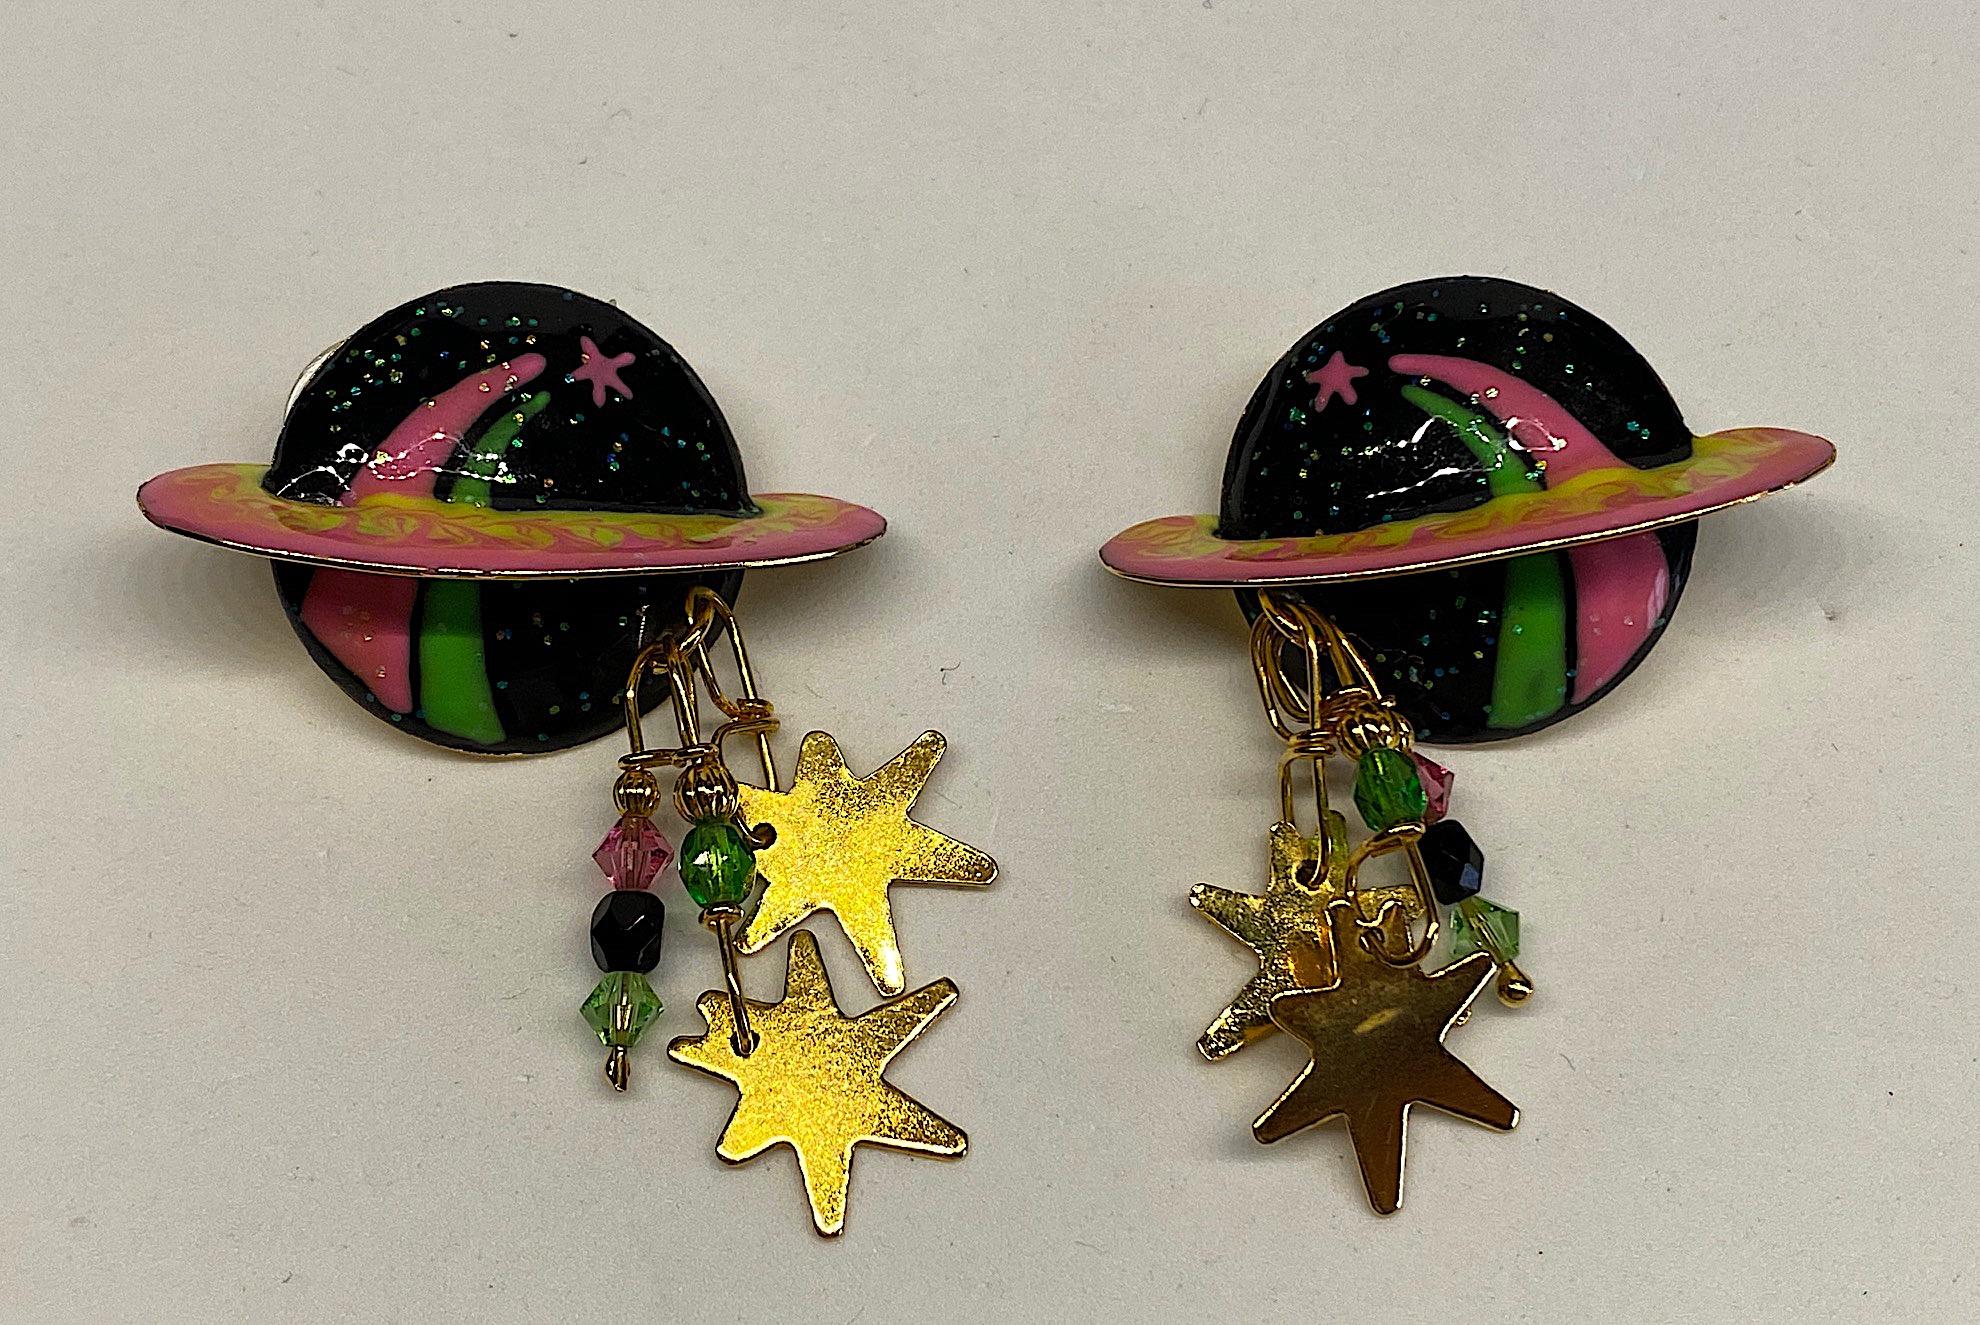 A fun and whimsical pair of Lunch at the Ritz enamel planet saturn earrings circa 1980/90. Each hearing is hand enameled in black, hot pink and green with bits of glitter. There is a right and a left earring. The planet is three dimensional with